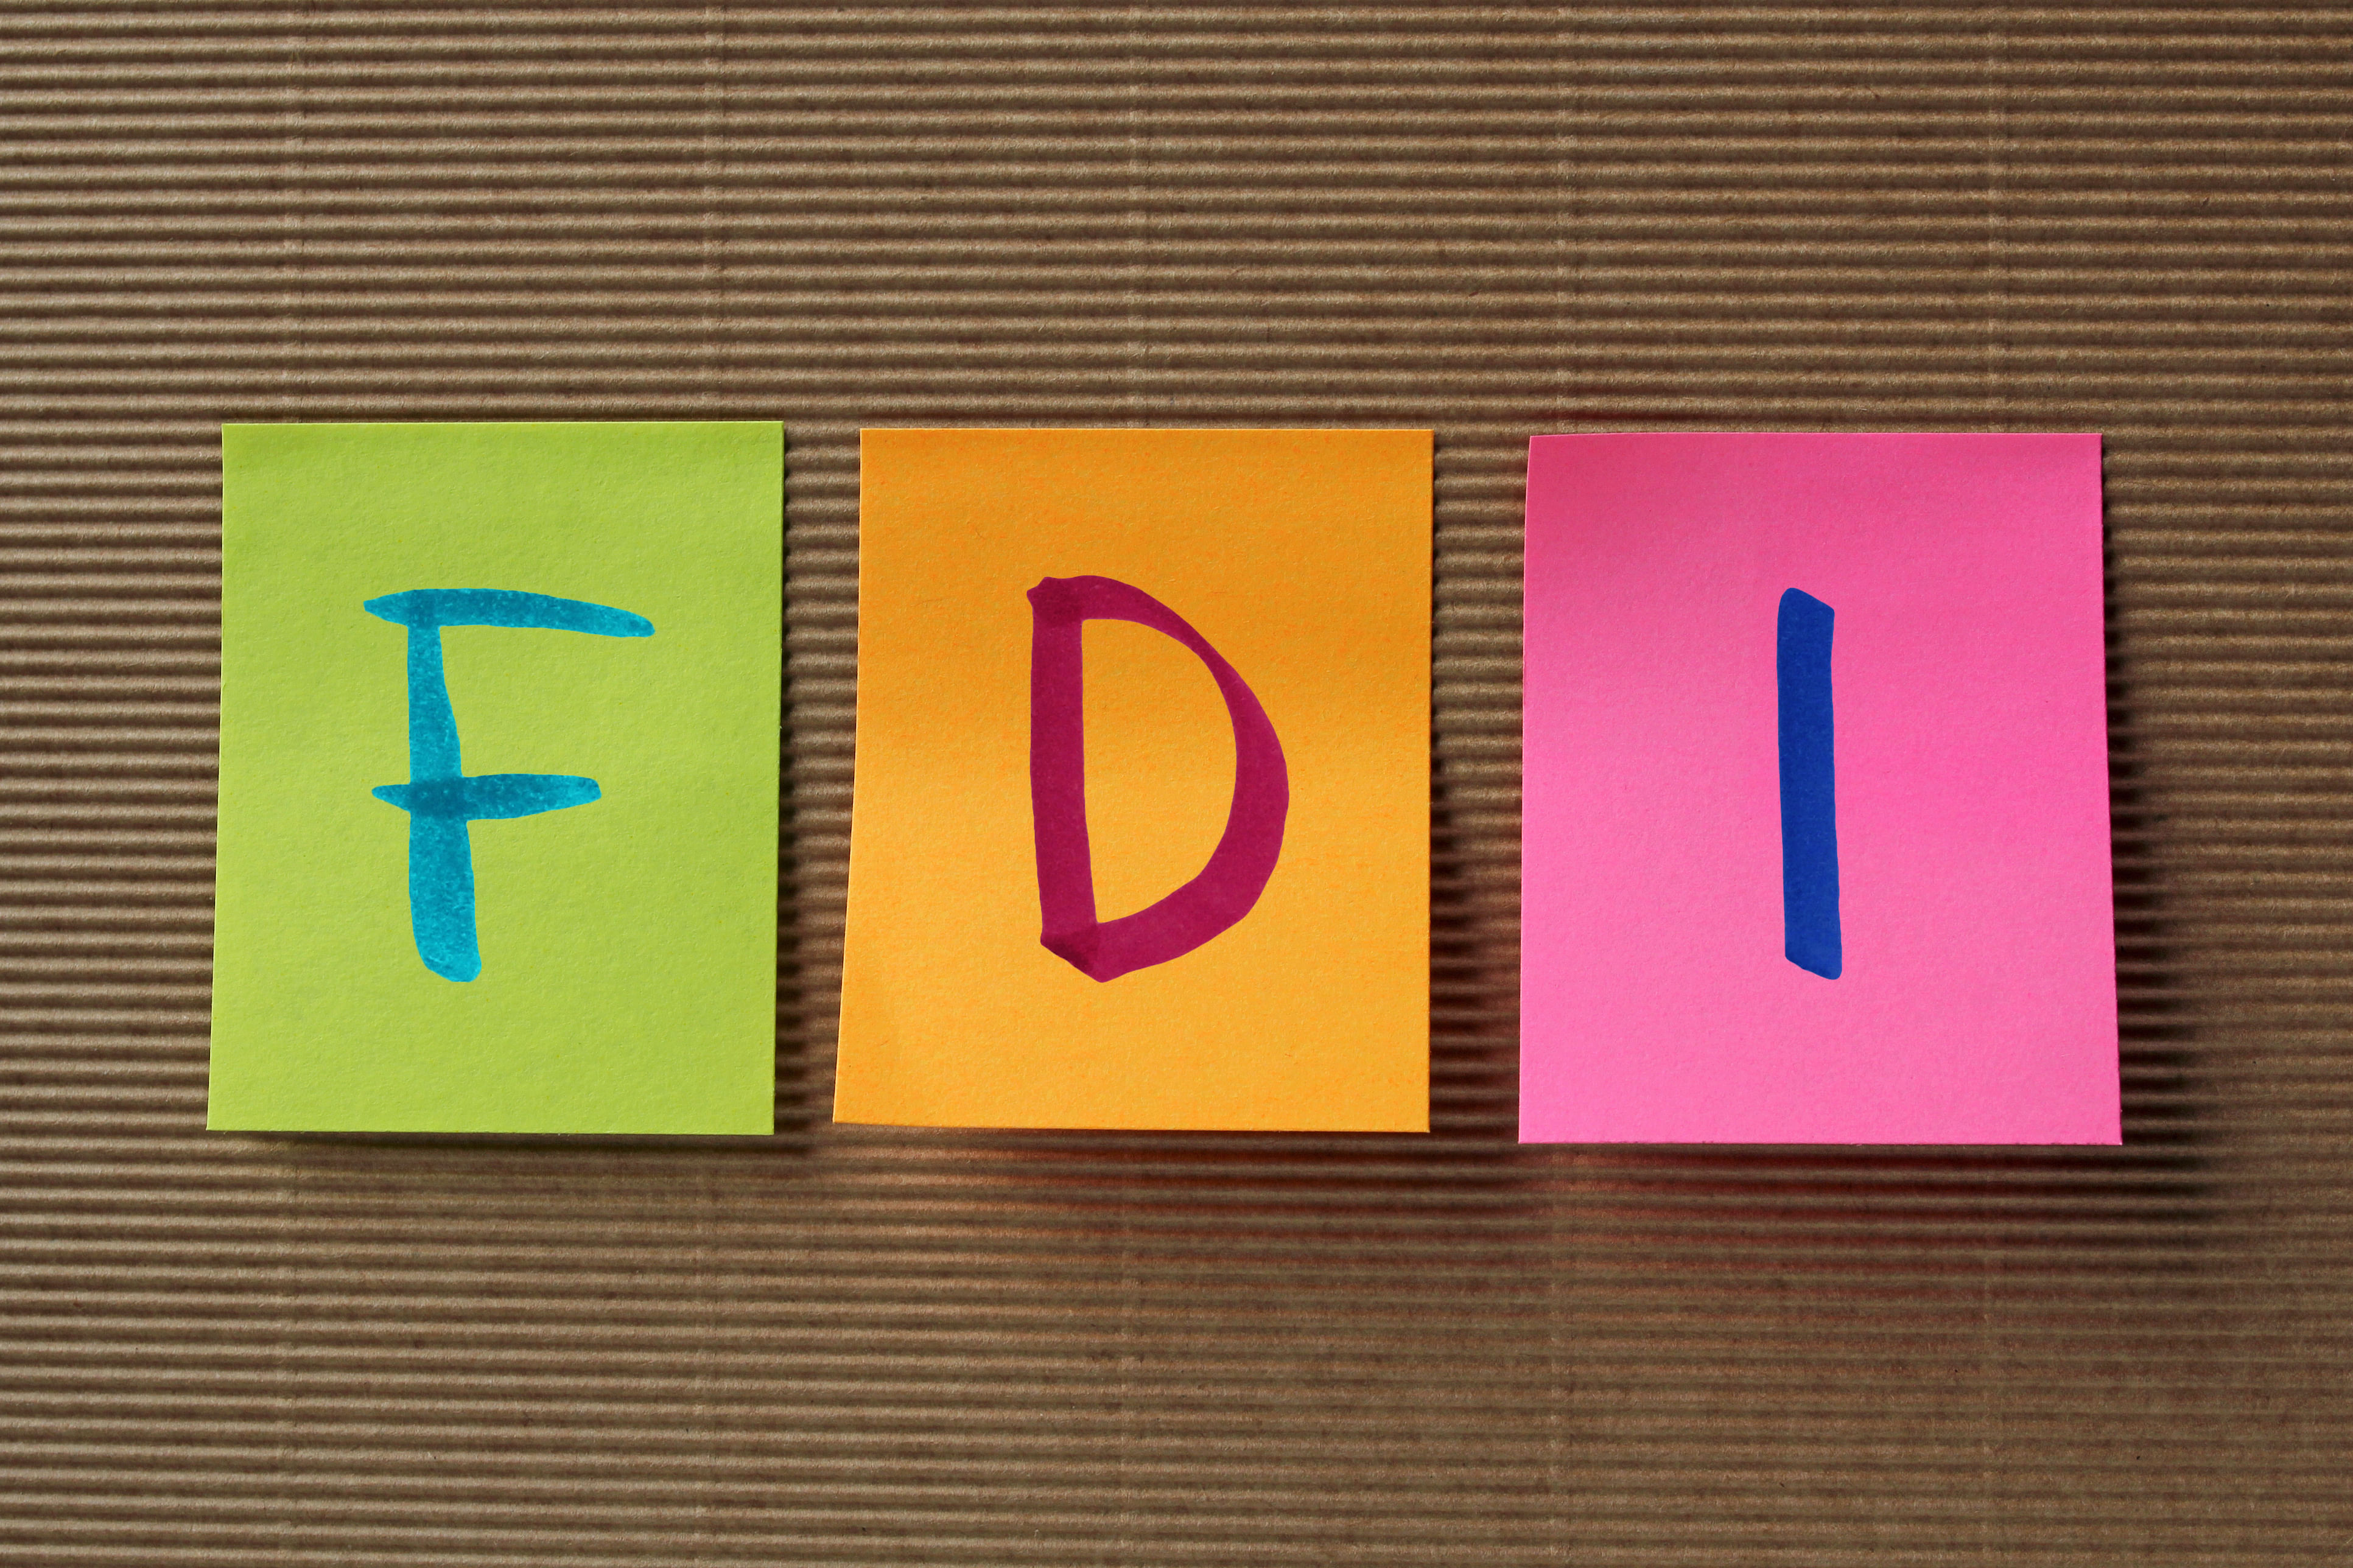 FDI (Foreign Direct Investment) acronym on colorful sticky notes
FDI